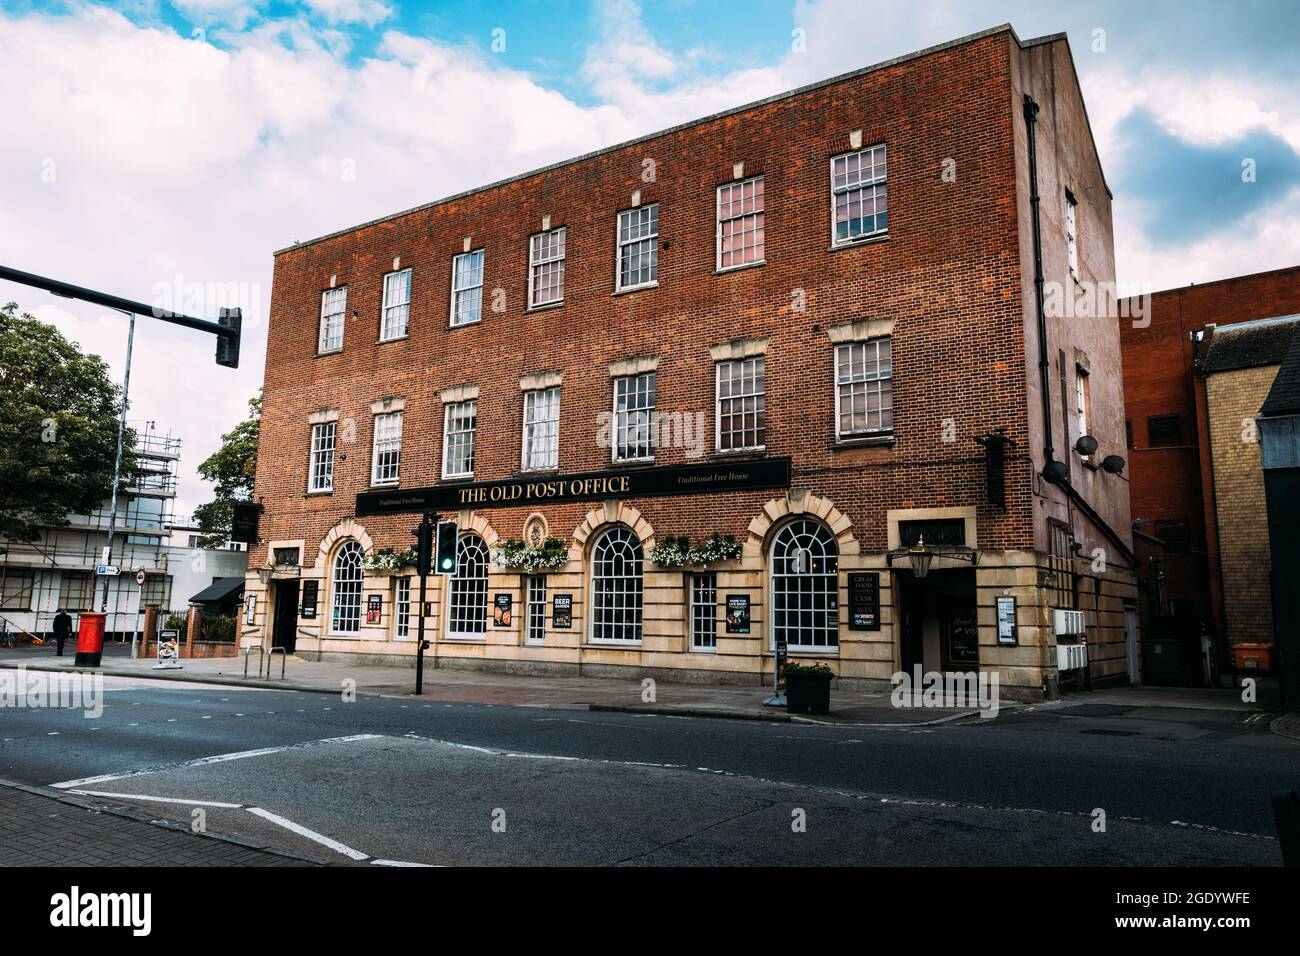 The exterior of The Old Post Office, 786 Fishponds Rd, Fishponds, Bristol  BS16 3TT (Aug 2021 Stock Photo - Alamy